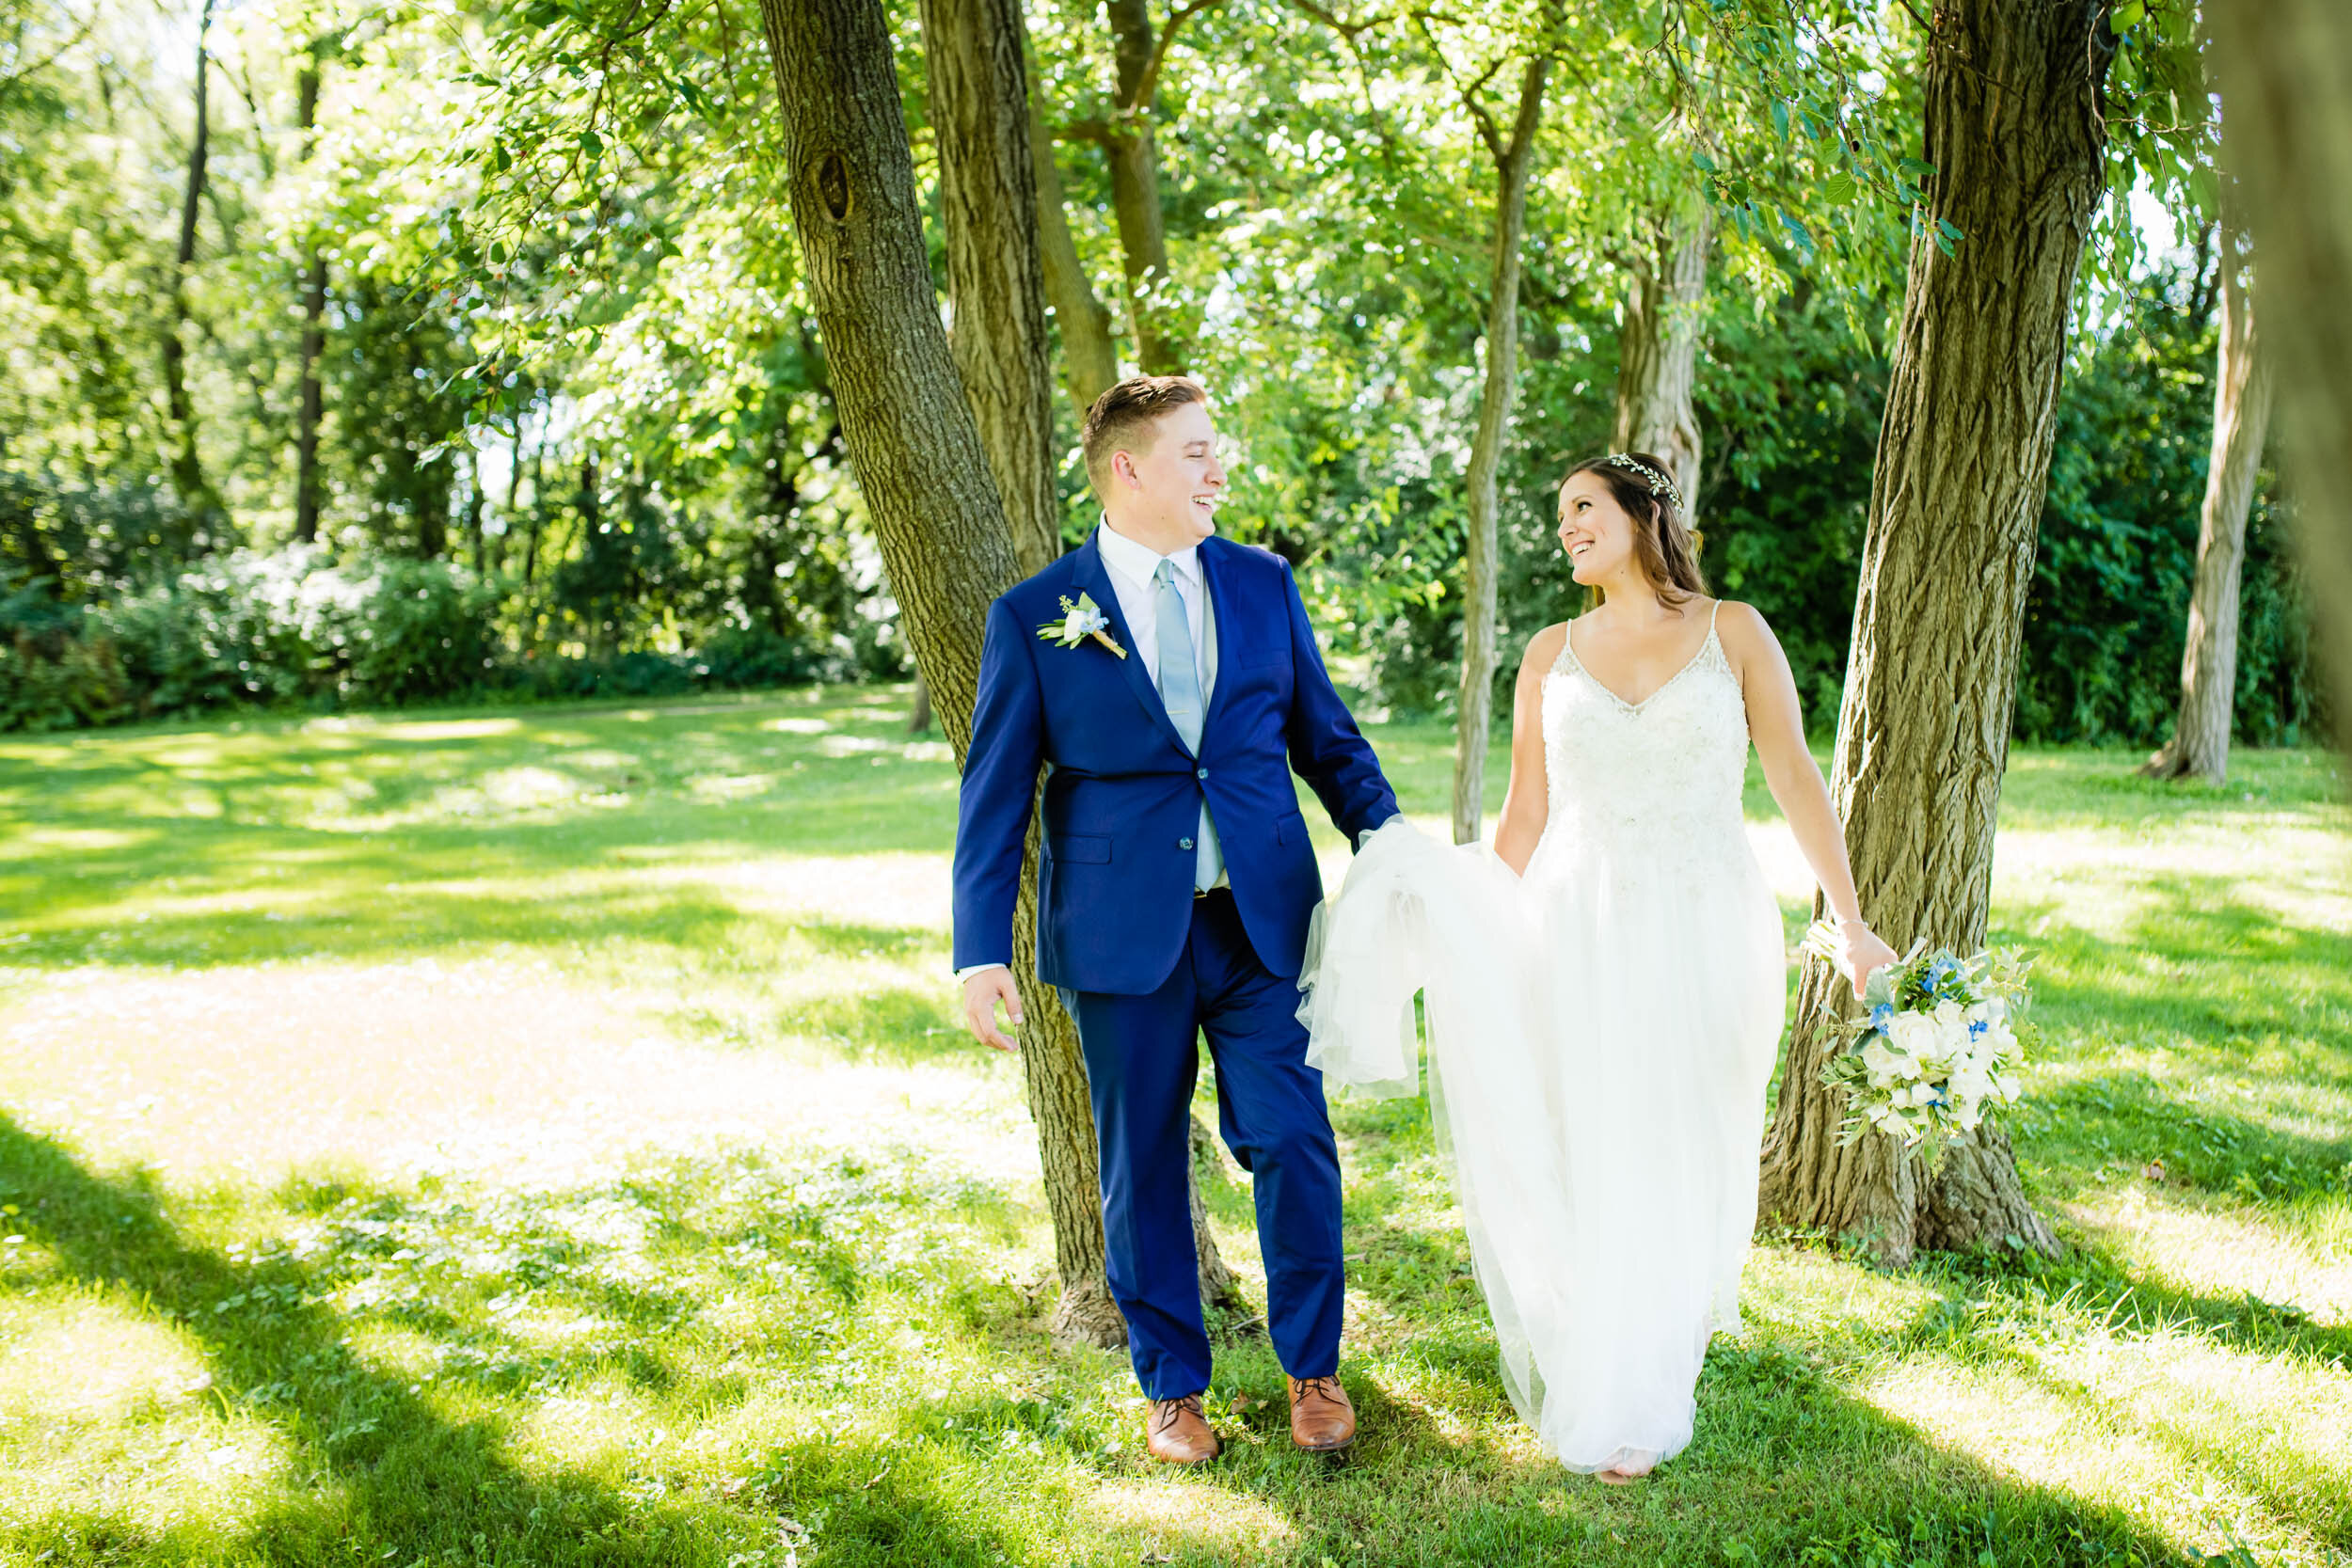 Bride and groom portrait at a park: Chicago backyard wedding photographed by J. Brown Photography.